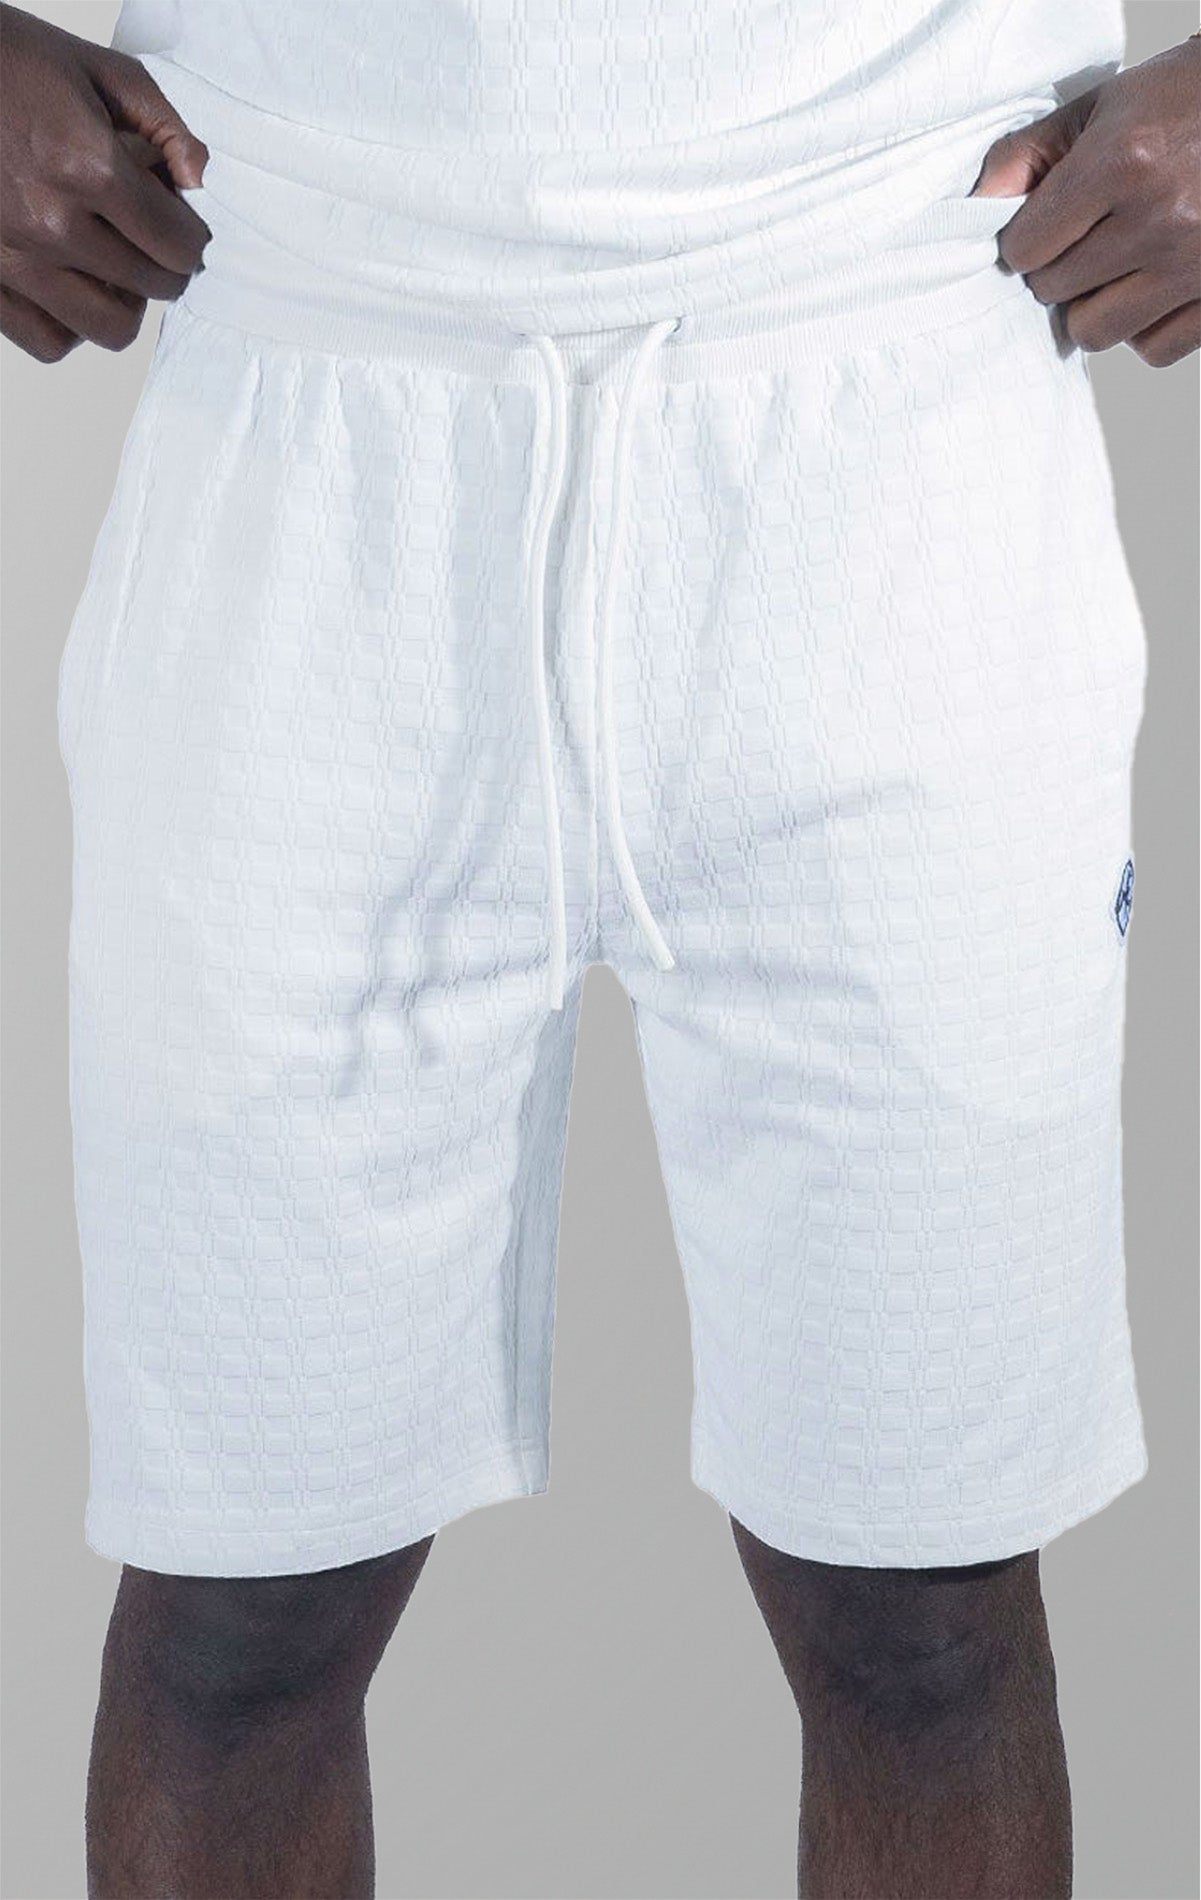 Modena Knit Shorts in white. Made from a high-quality blend of 95% cotton and 5% spandex for a soft and comfortable feel. Features a unique colored blocking design and a pre-shrunk true-to-size fit.